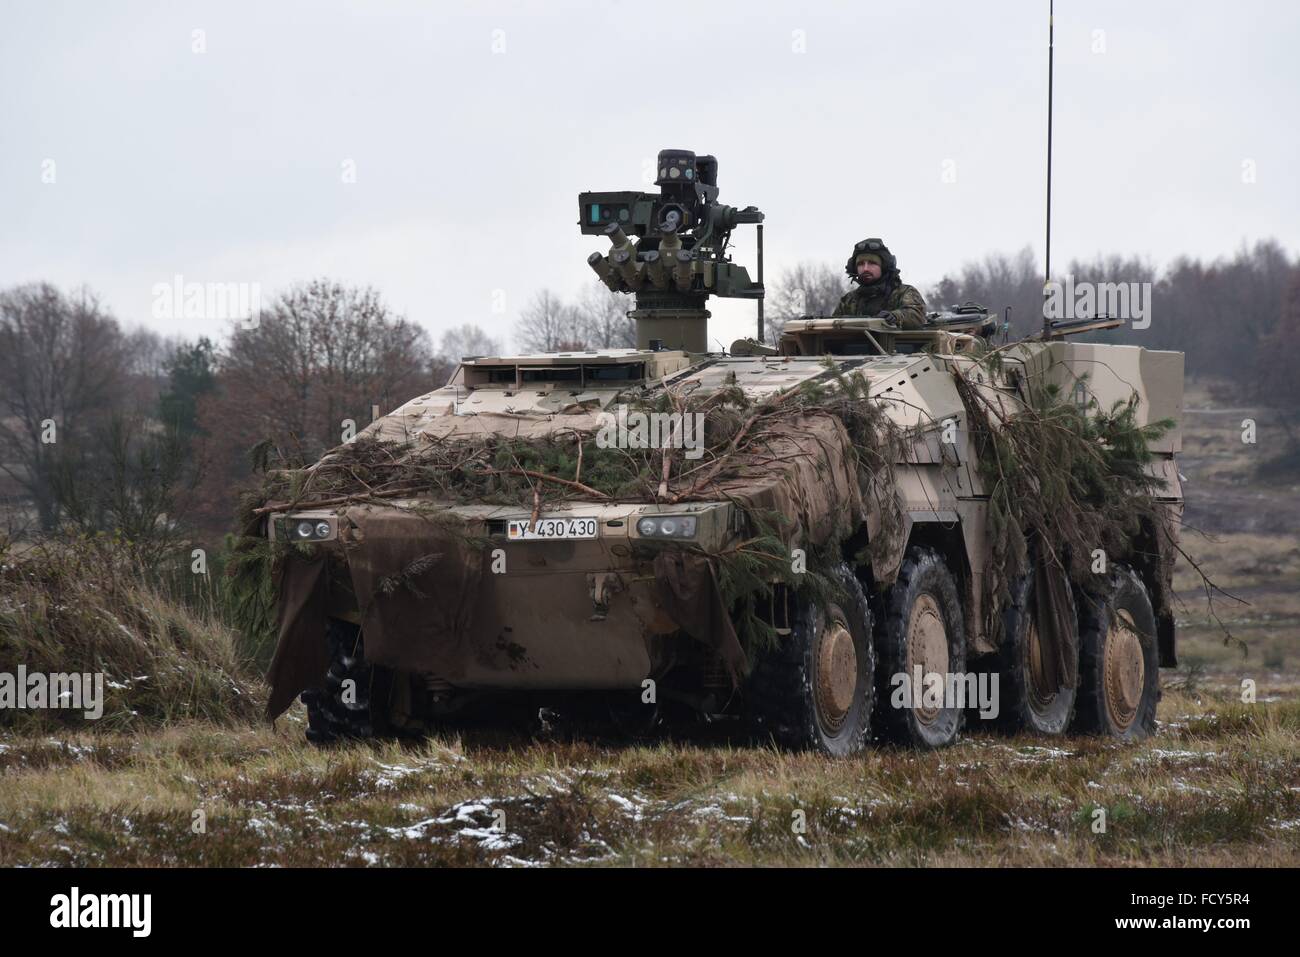 http://c8.alamy.com/comp/FCY5R4/gtk-boxer-a1-armored-personnel-carrier-of-3rd-company-1st-infantry-FCY5R4.jpg